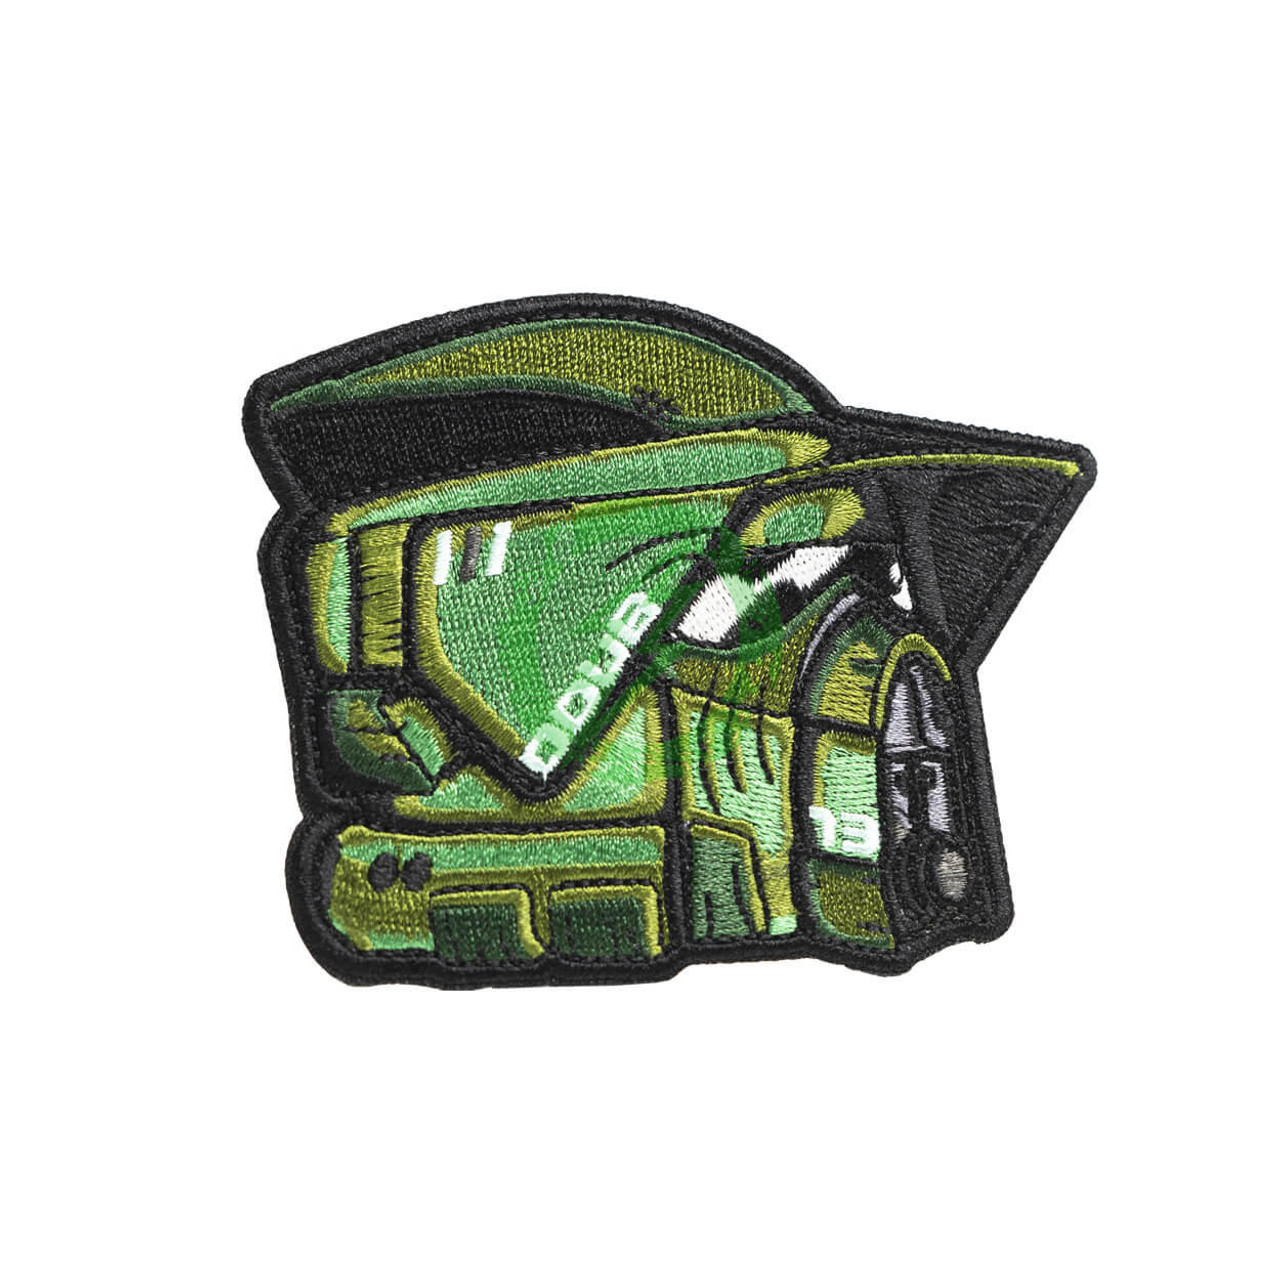  Tactical Outfitters ARF Trooper Embroidered Morale Patch	 